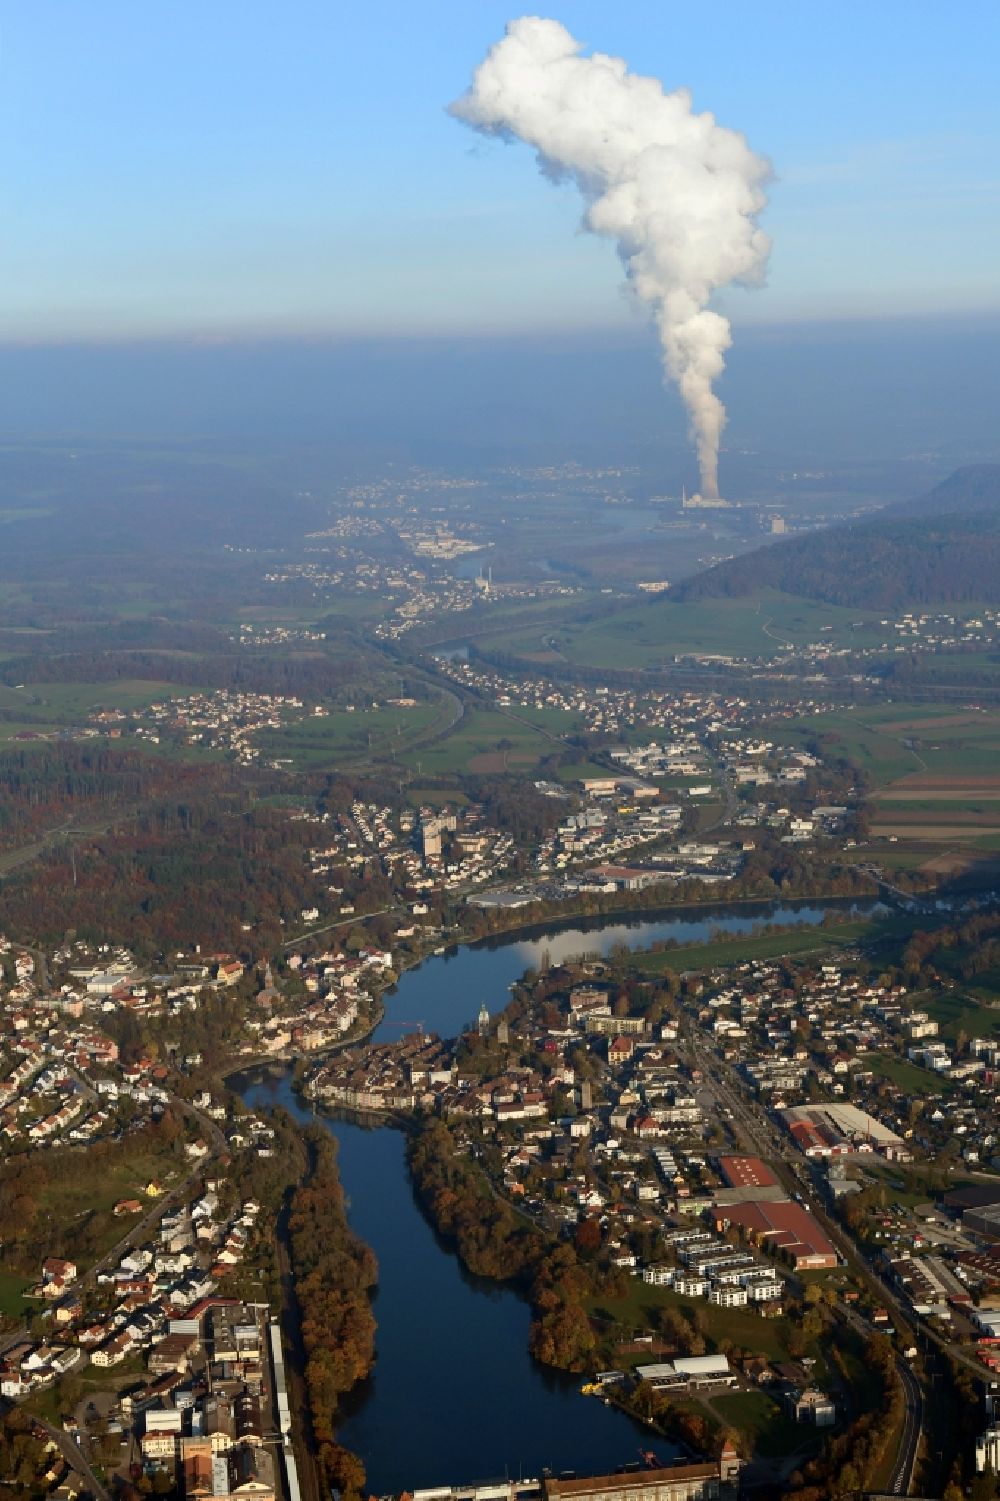 Aerial image Laufenburg - Landscape at the Rhine - river in Laufenburg in the state Baden-Wurttemberg, Germany. Steam column of the NPP nuclear power plant KKL Leibstadt in Switzerland